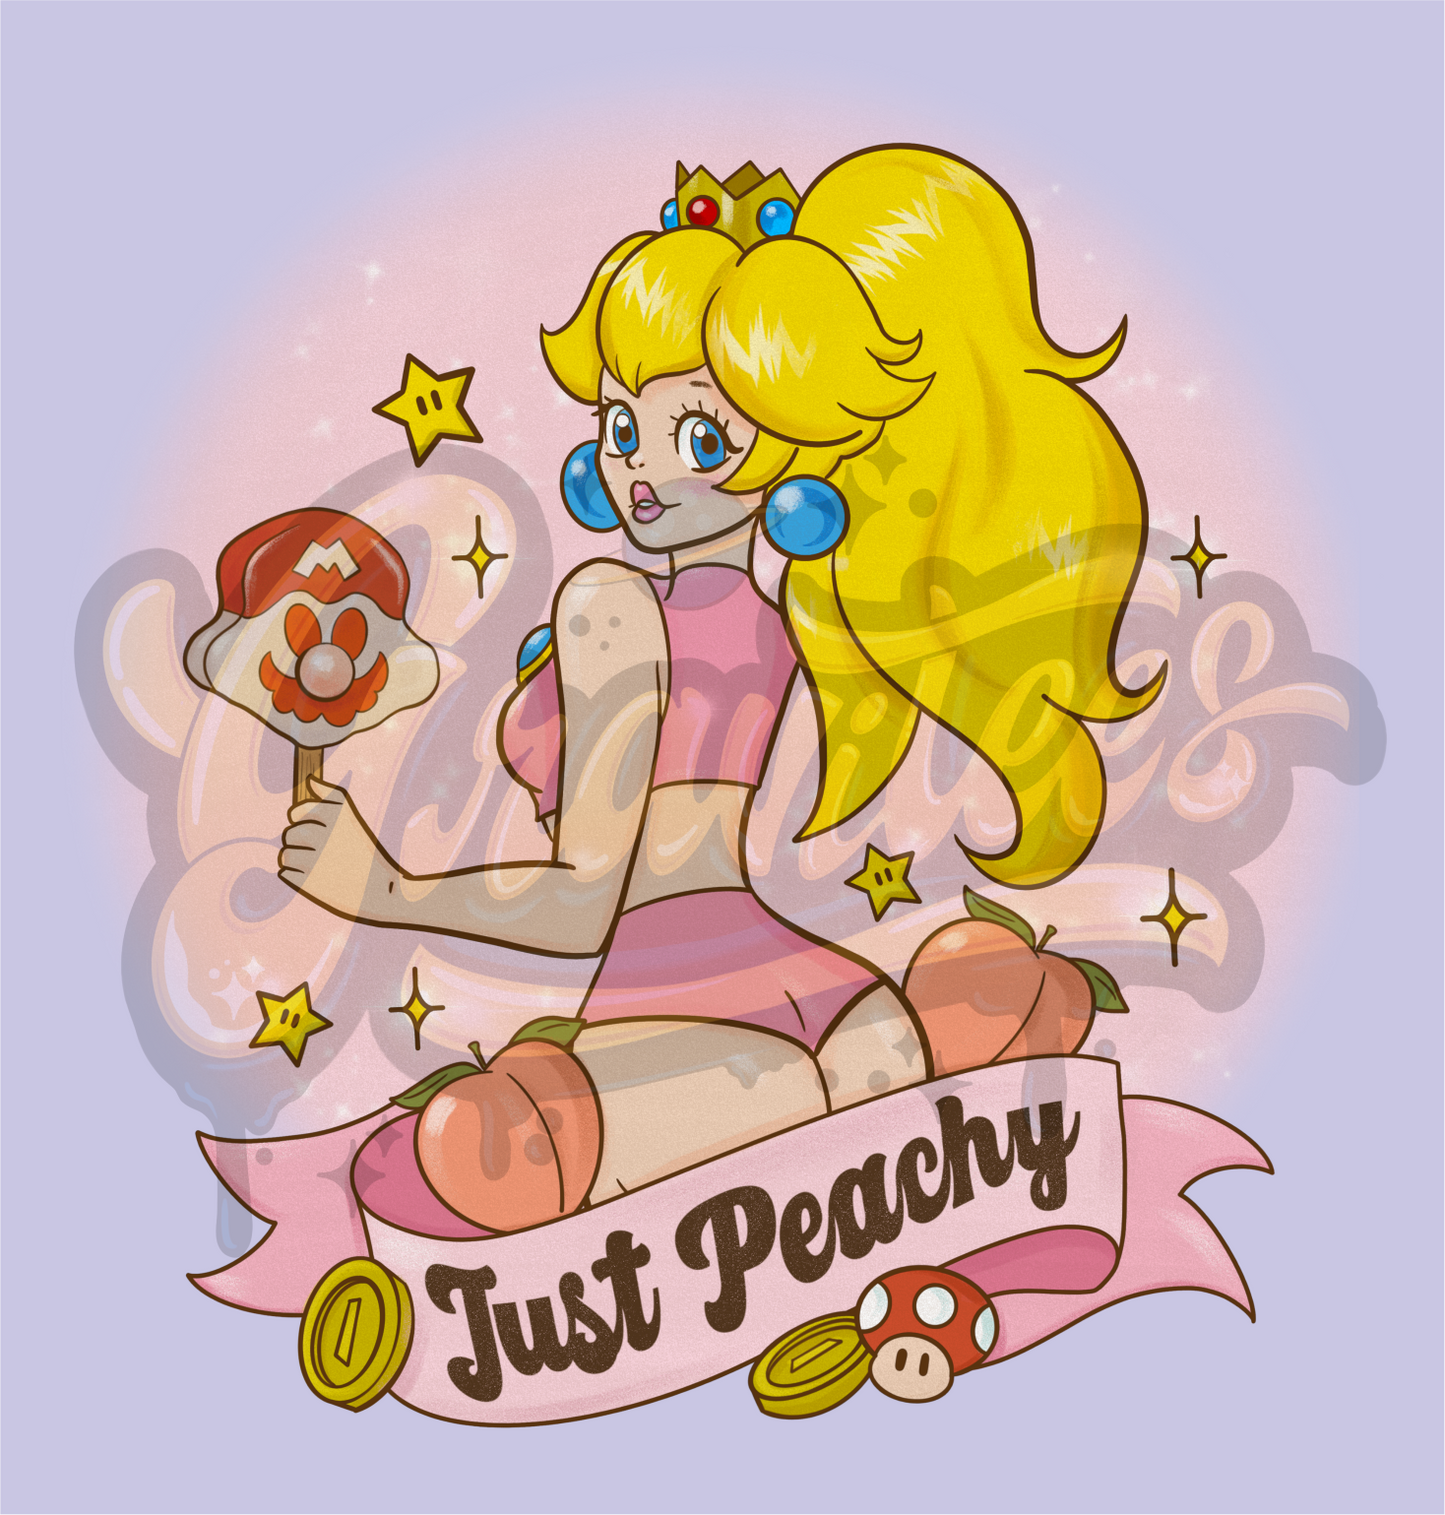 Just Peachy PNG, Gamer Clipart, Princess Clipart for DTF or Shirt Printing, PNG Only!